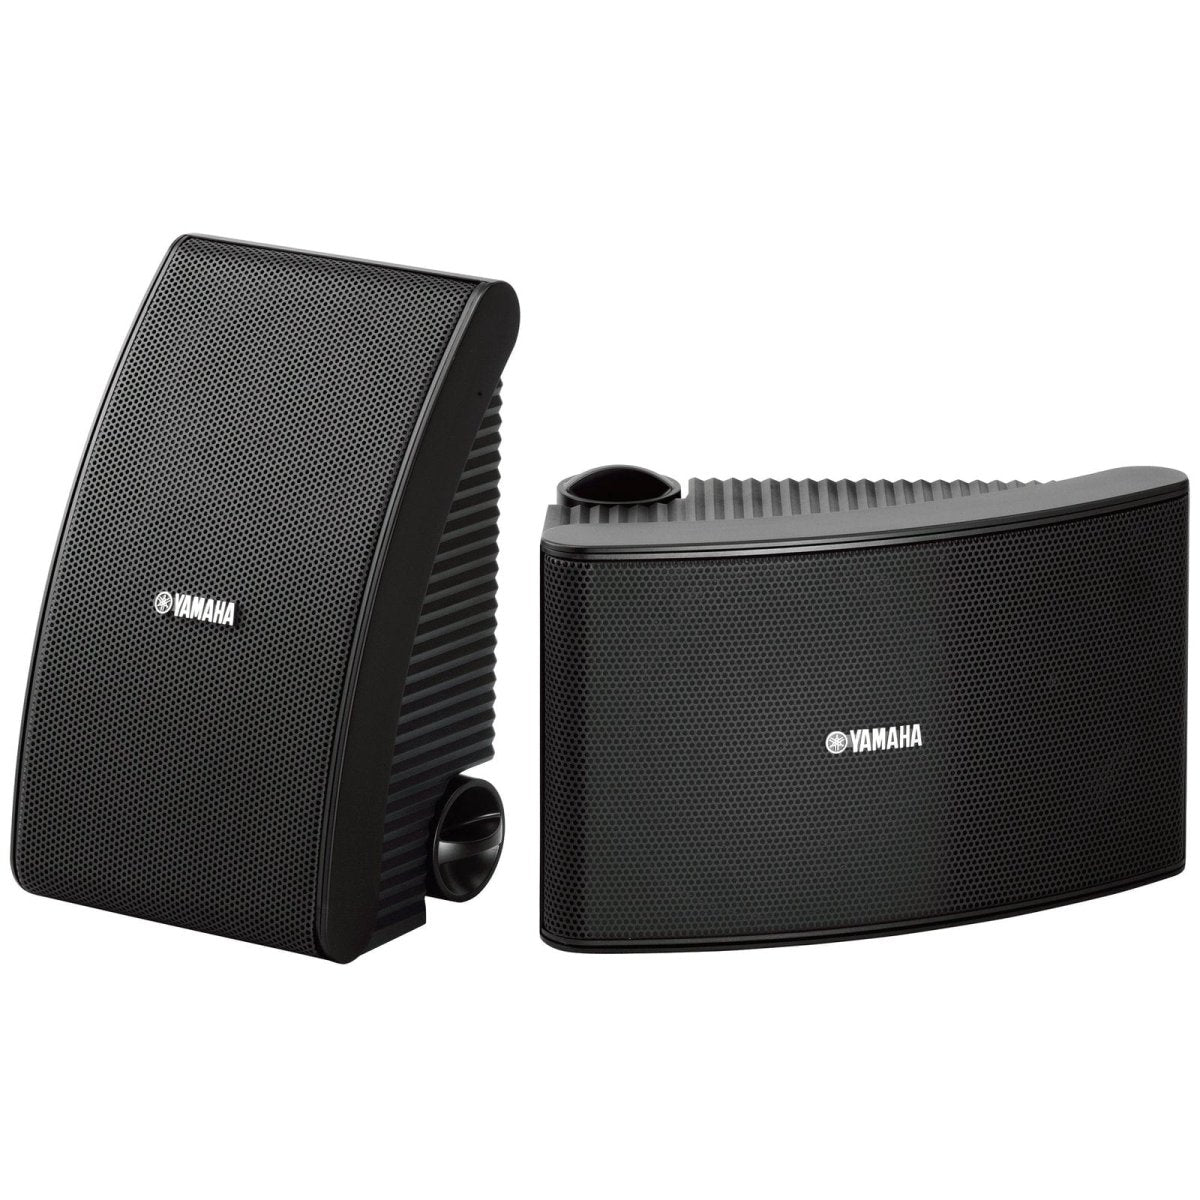 Yamaha NSAW592BLB 150W All-Weather Outdoor Speakers (Pair) - Black | Atlantic Electrics